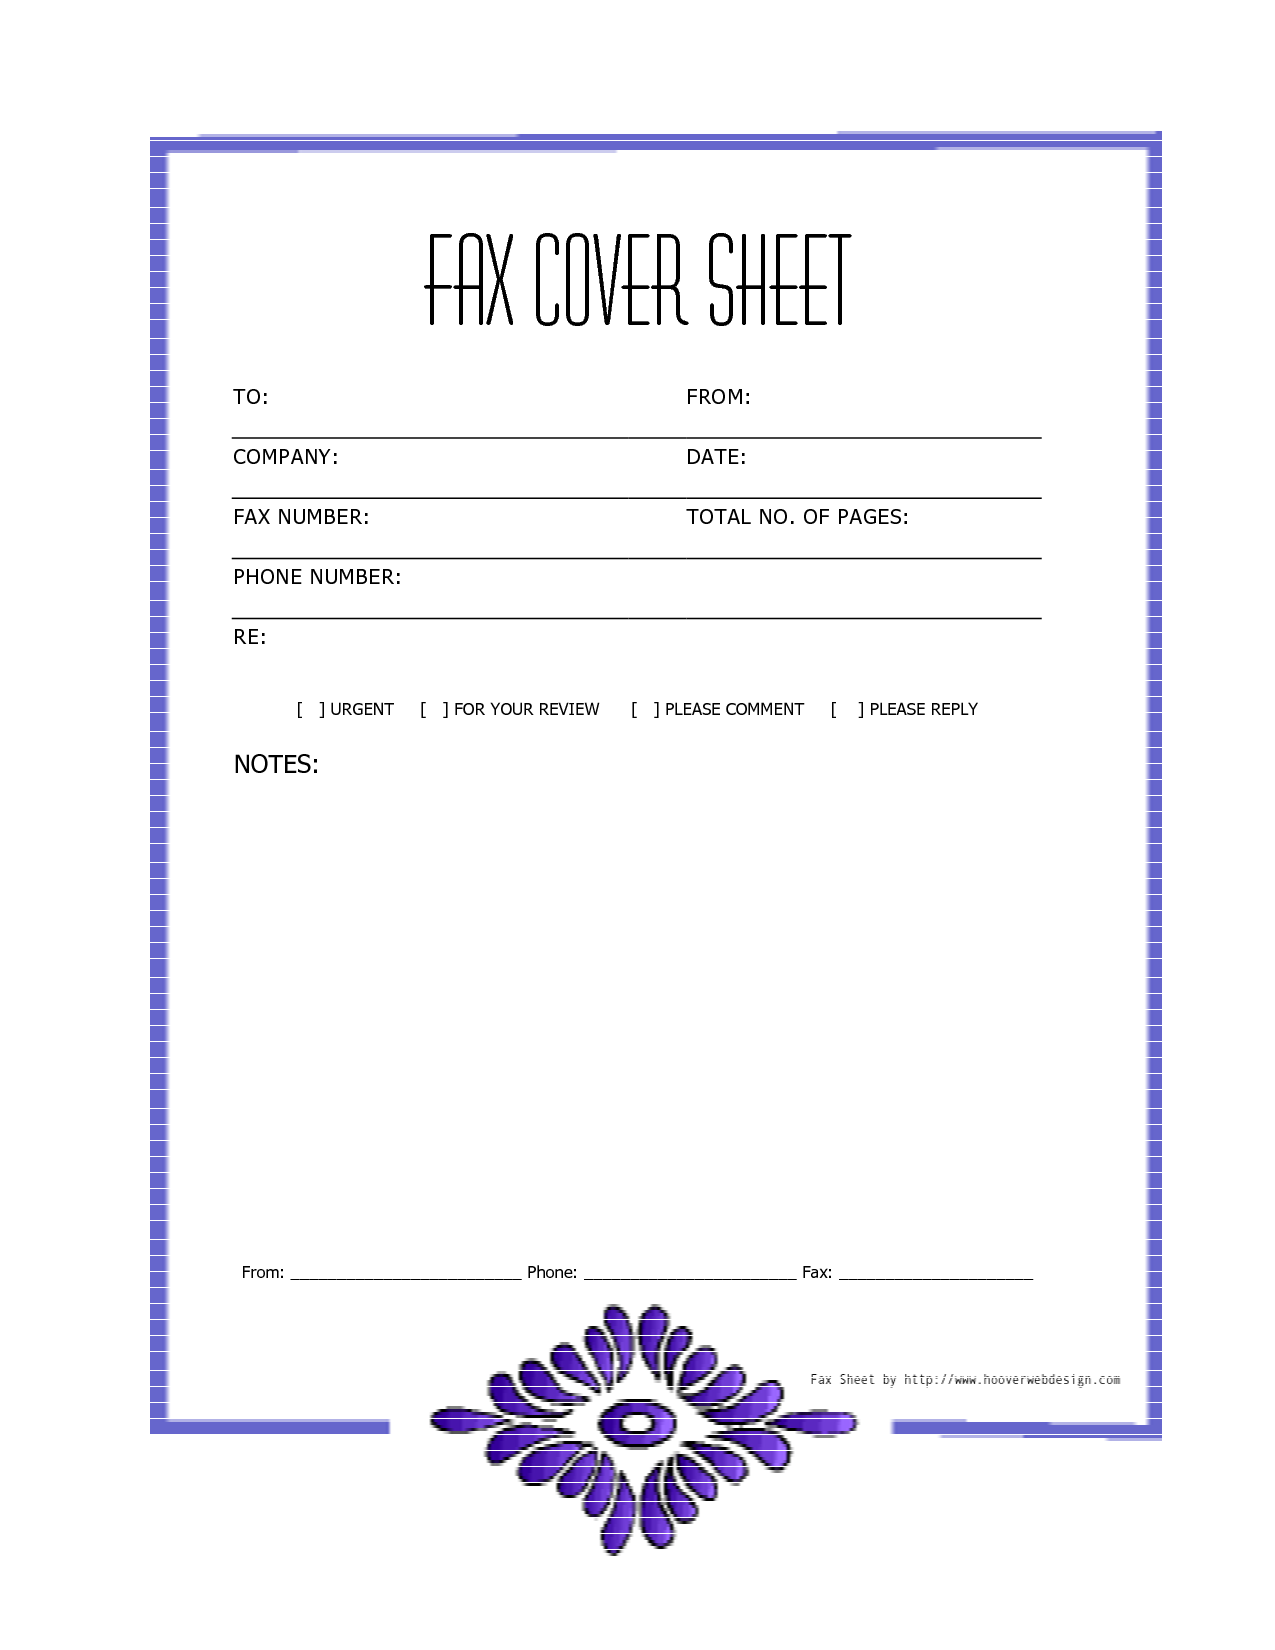 20 Cover Page Template Free Download Images - Fax Cover Sheet Throughout Fax Cover Sheet Template Word 2010